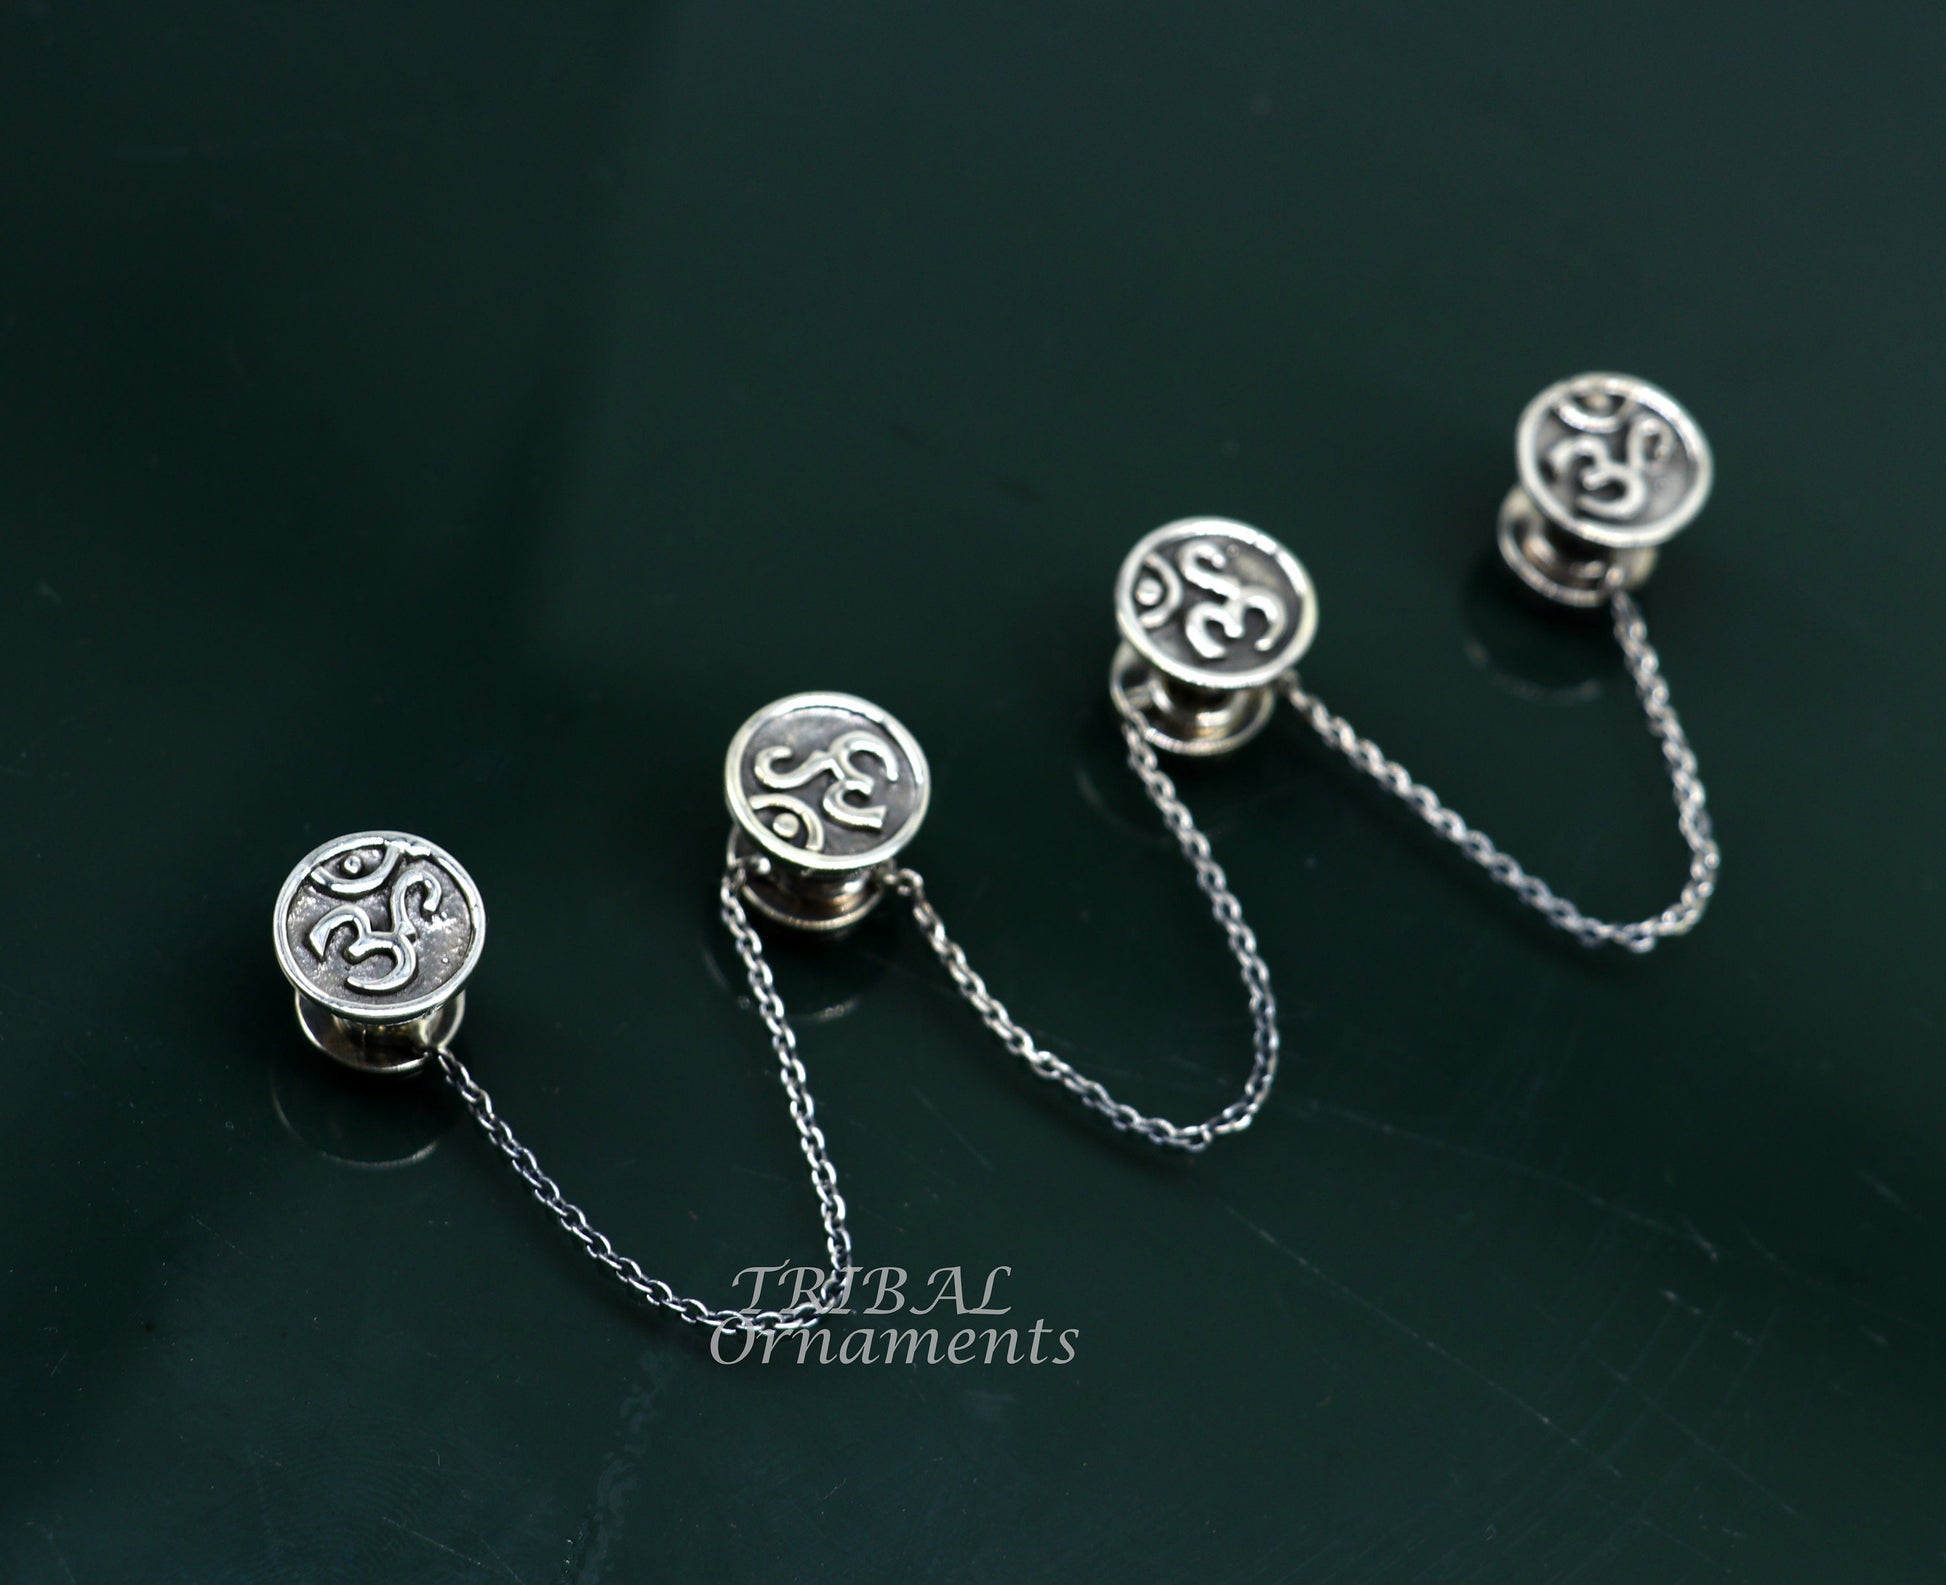 925 Sterling silver handmade gorgeous sign Aum or OM design buttons or cufflinks  for men's kurta, best gifting jewelry occasions btn02 - TRIBAL ORNAMENTS